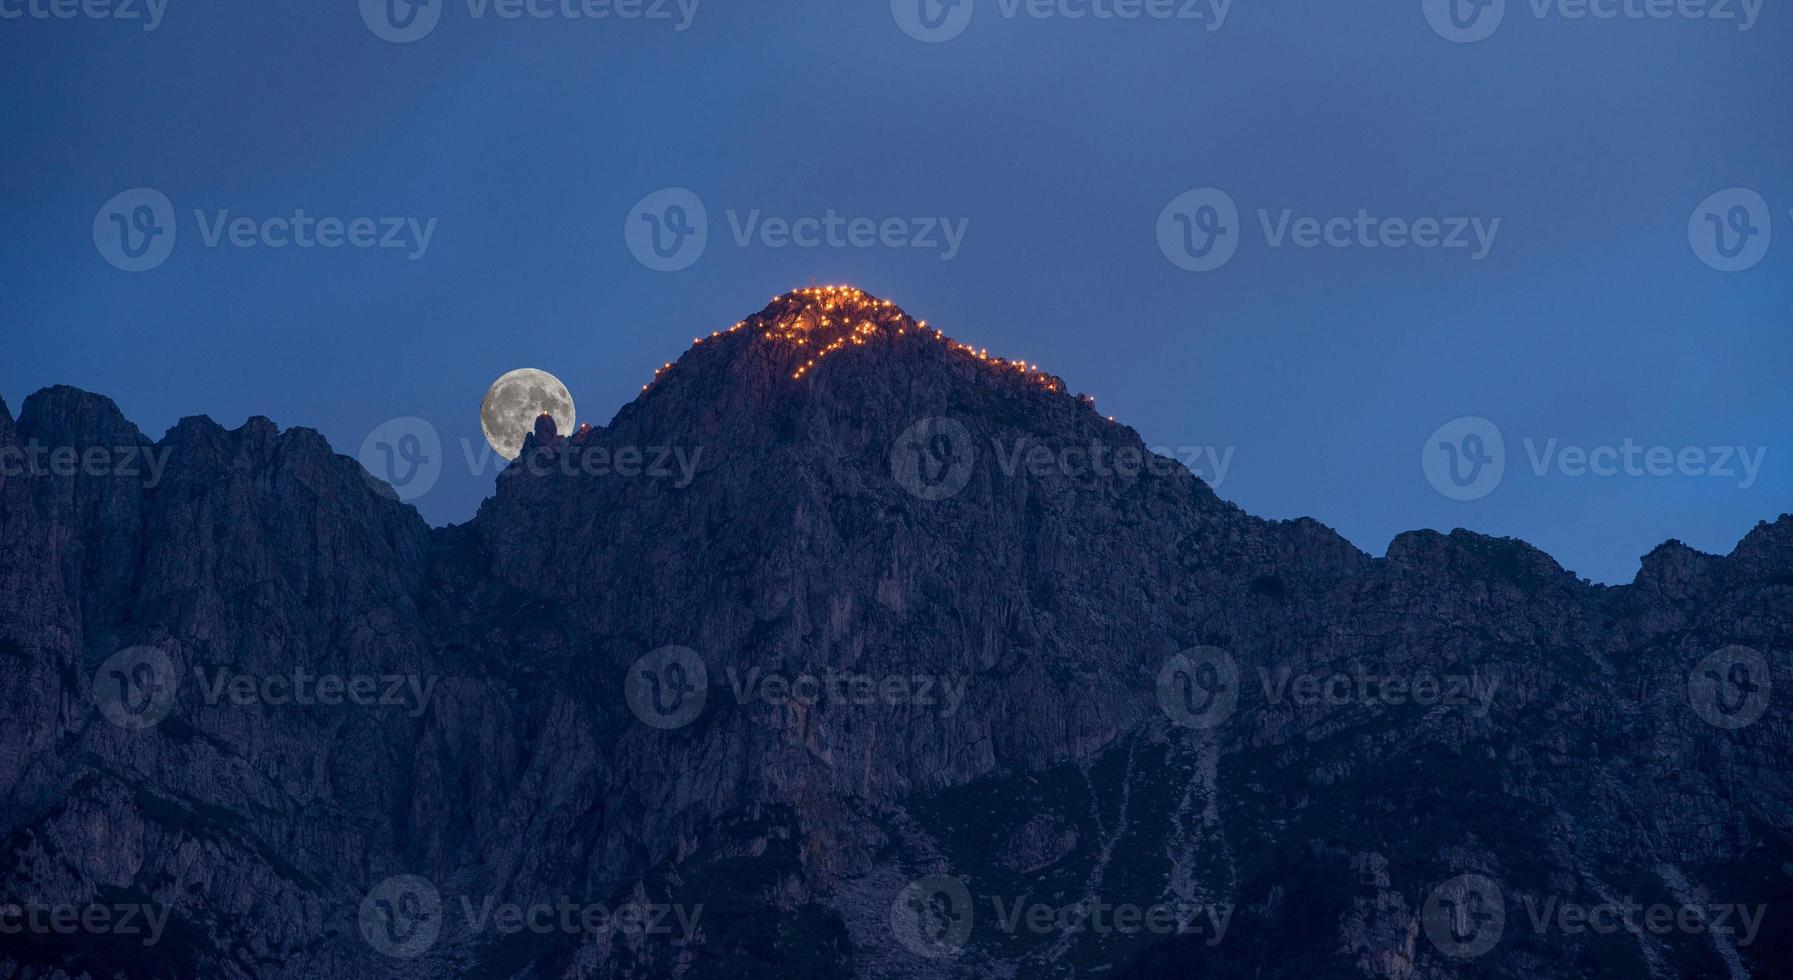 Mountain lit with torches photo